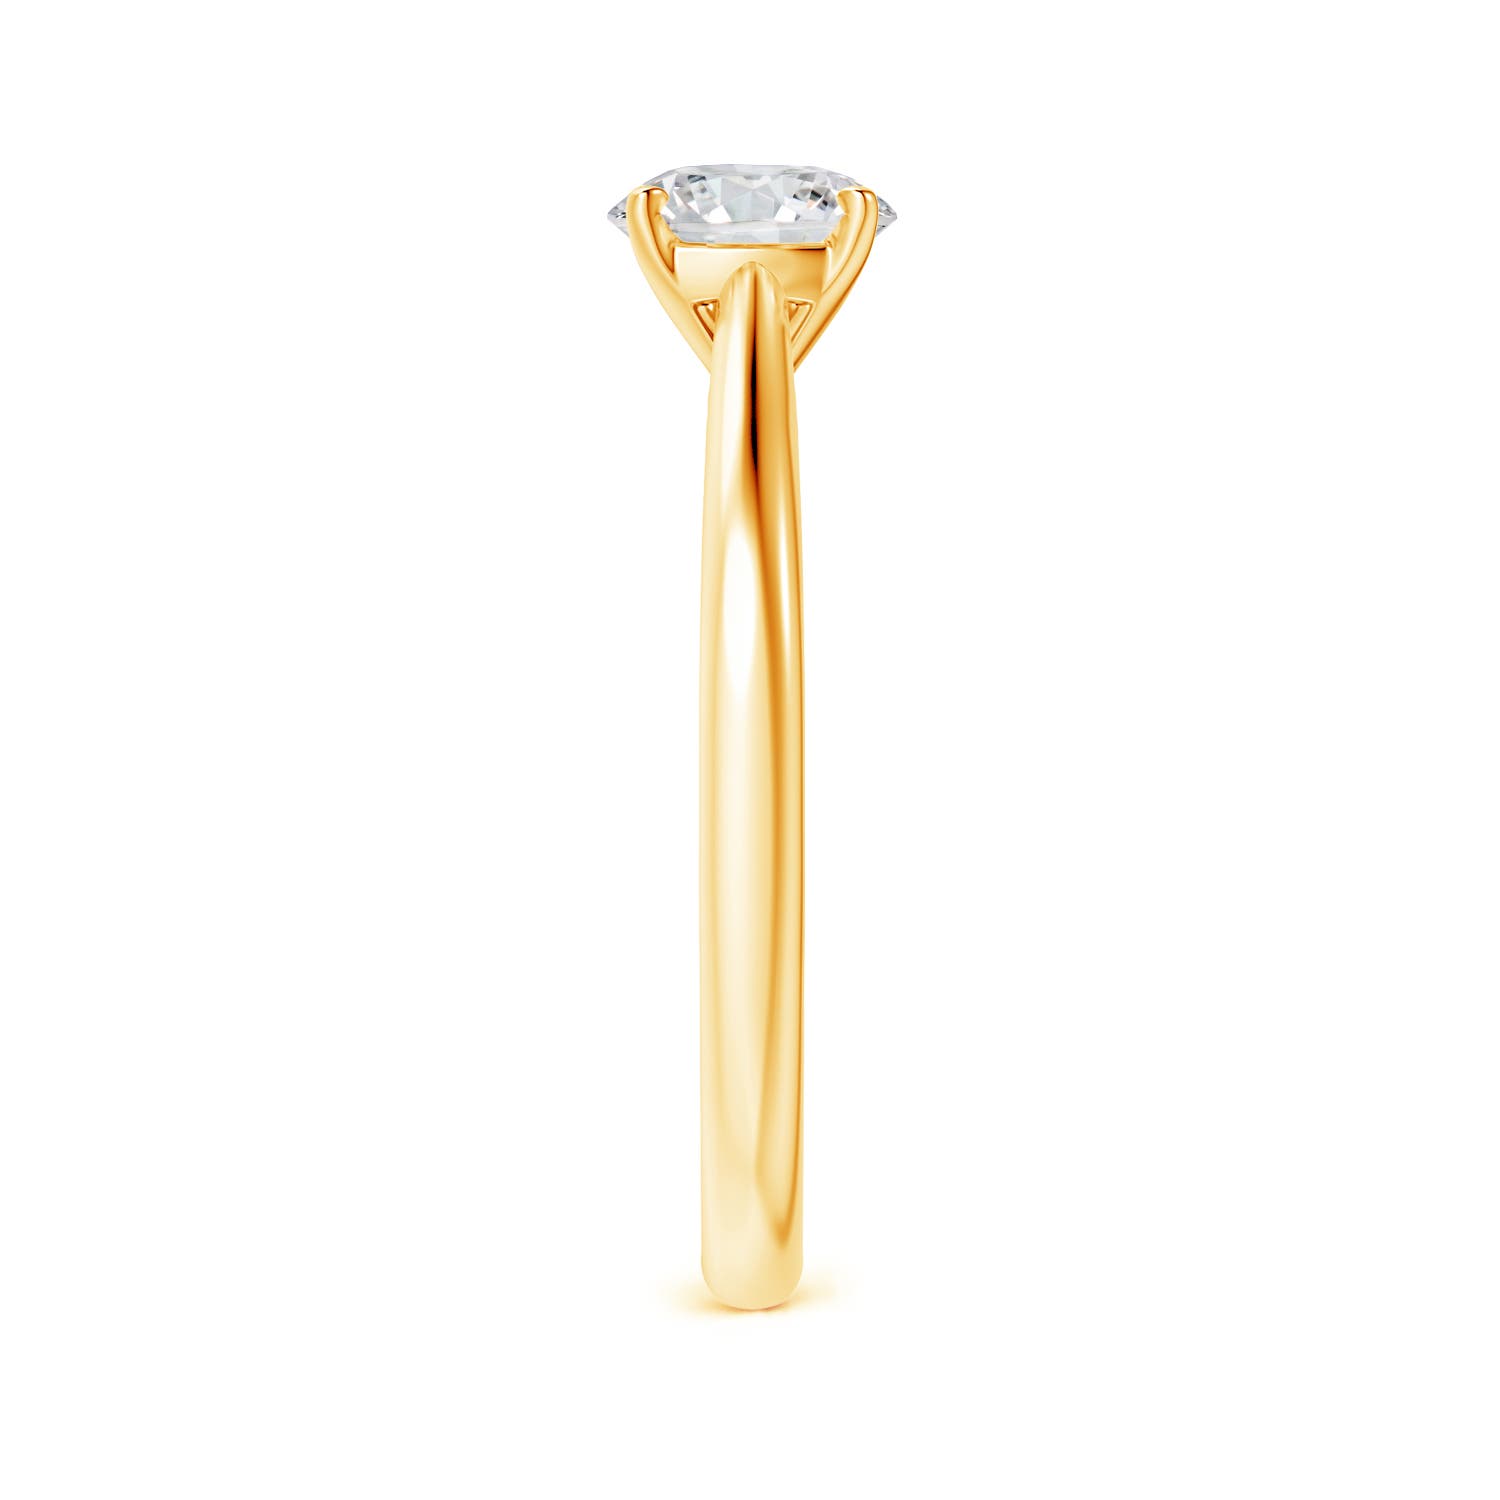 H, SI2 / 1 CT / 14 KT Yellow Gold